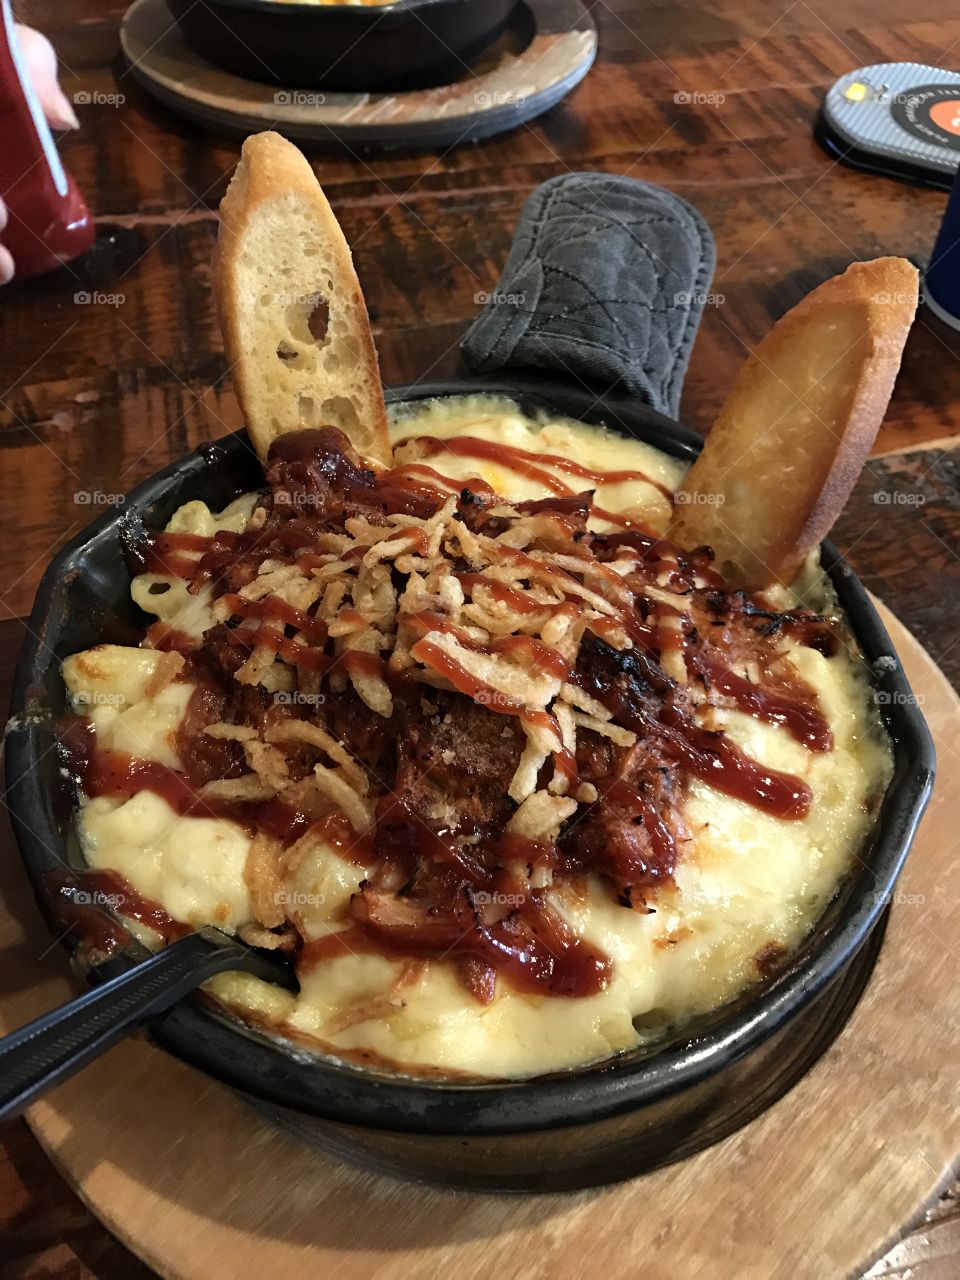 Mac and cheese and pulled pork